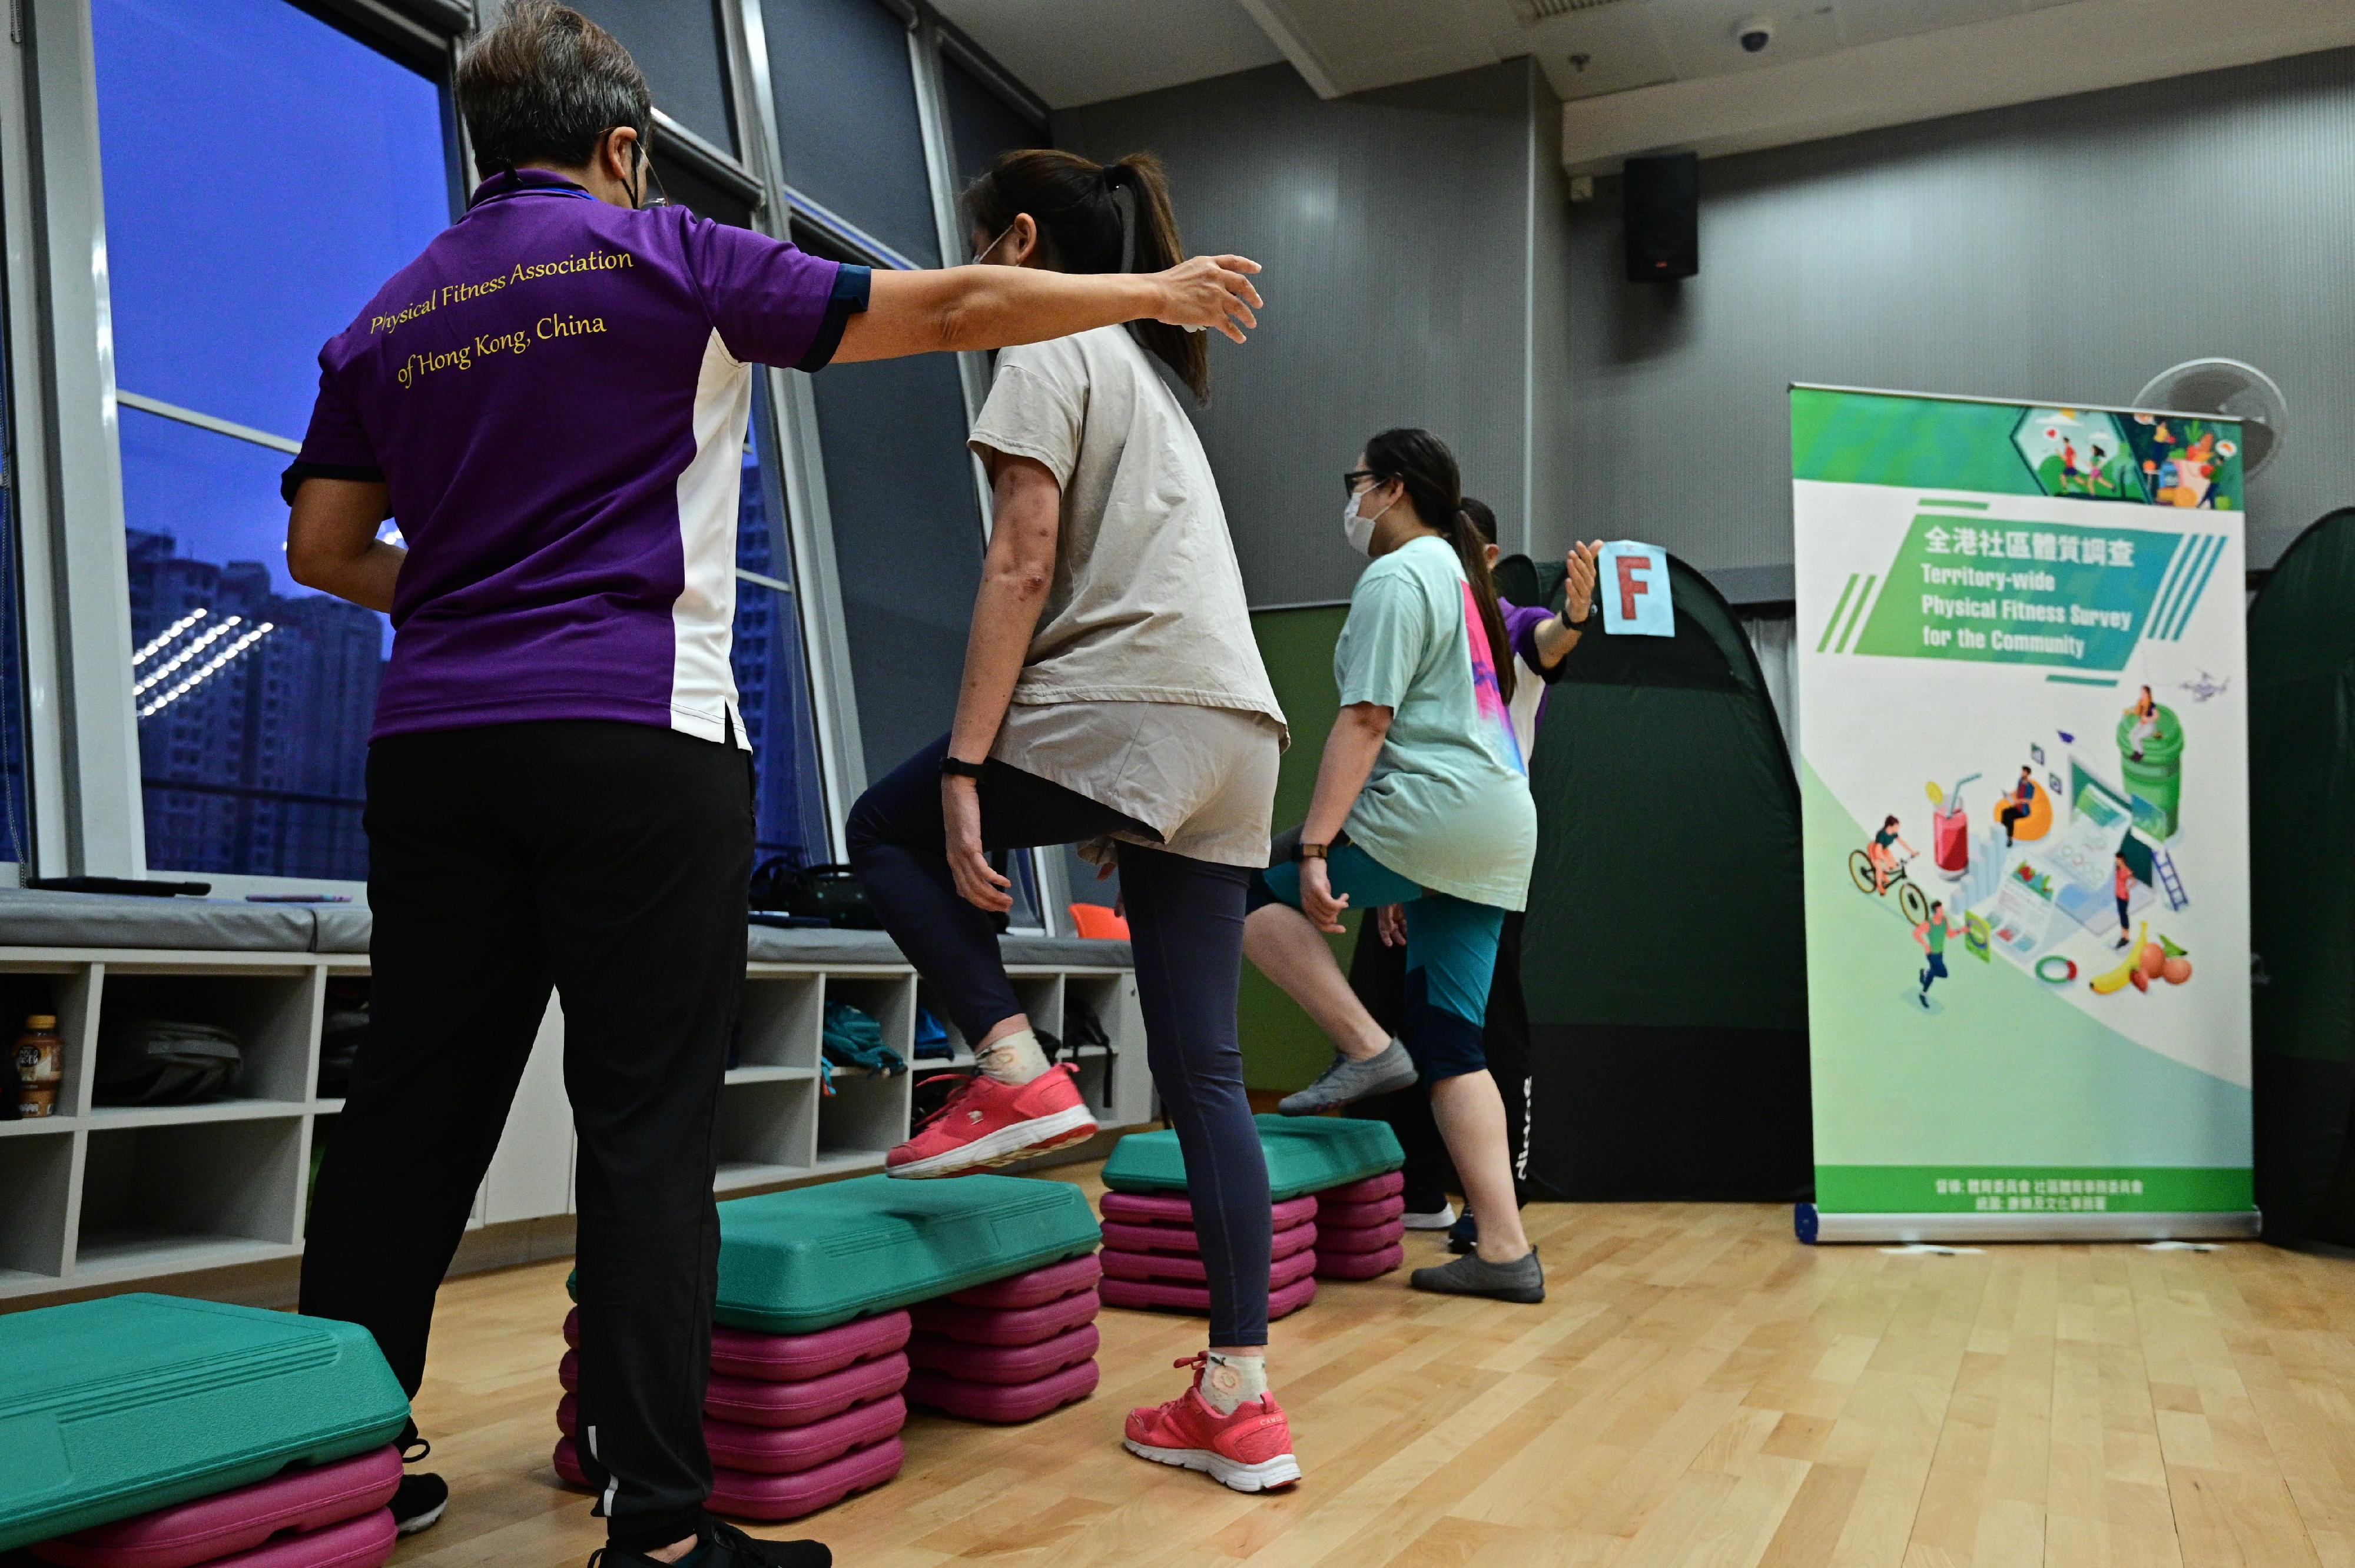 The Leisure and Cultural Services Department will hold four Territory-wide Physical Fitness Survey for the Community test days from June to August to enable participants to have a general understanding of their own fitness conditions, as well as to understand the importance of physical fitness for health and exercising regularly in daily life. The test items required for different age groups vary. Photo shows adult participants doing a 3-minute step test.